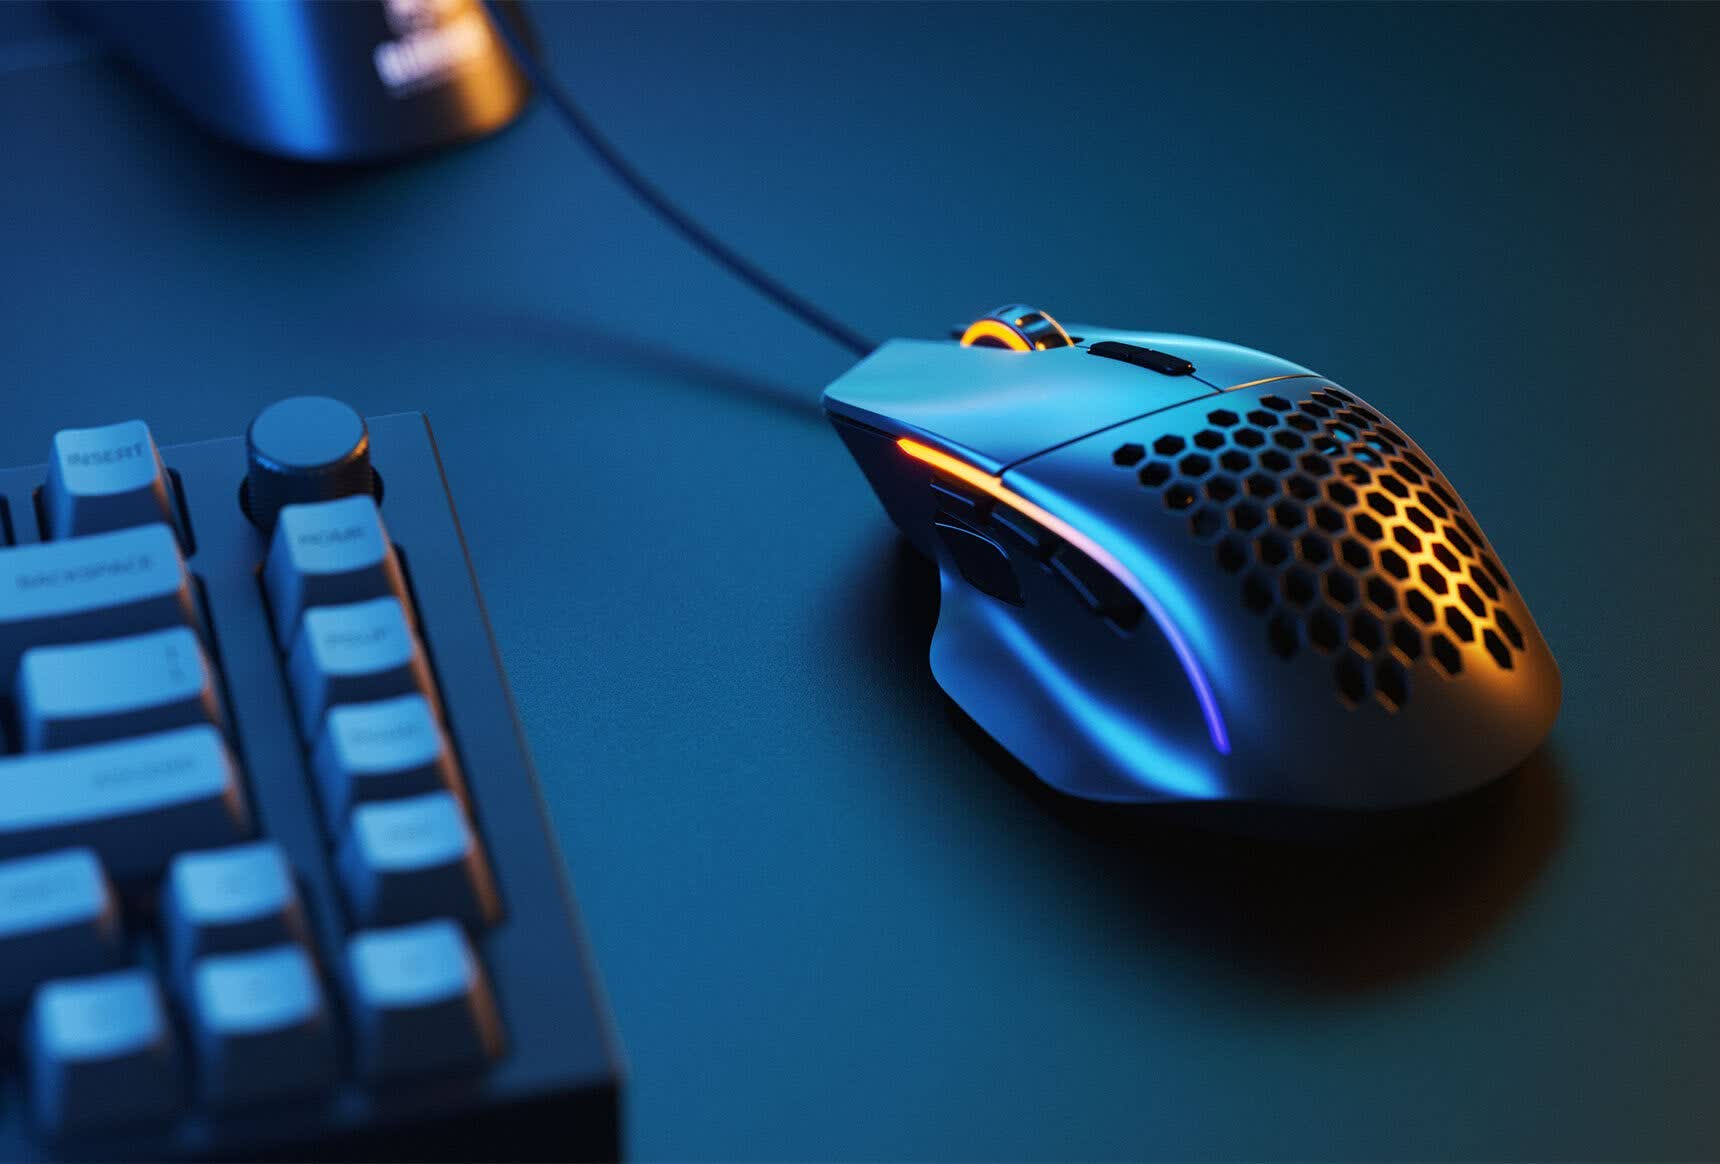 The Glorious Model I is a value-focused gaming mouse with modular side buttons